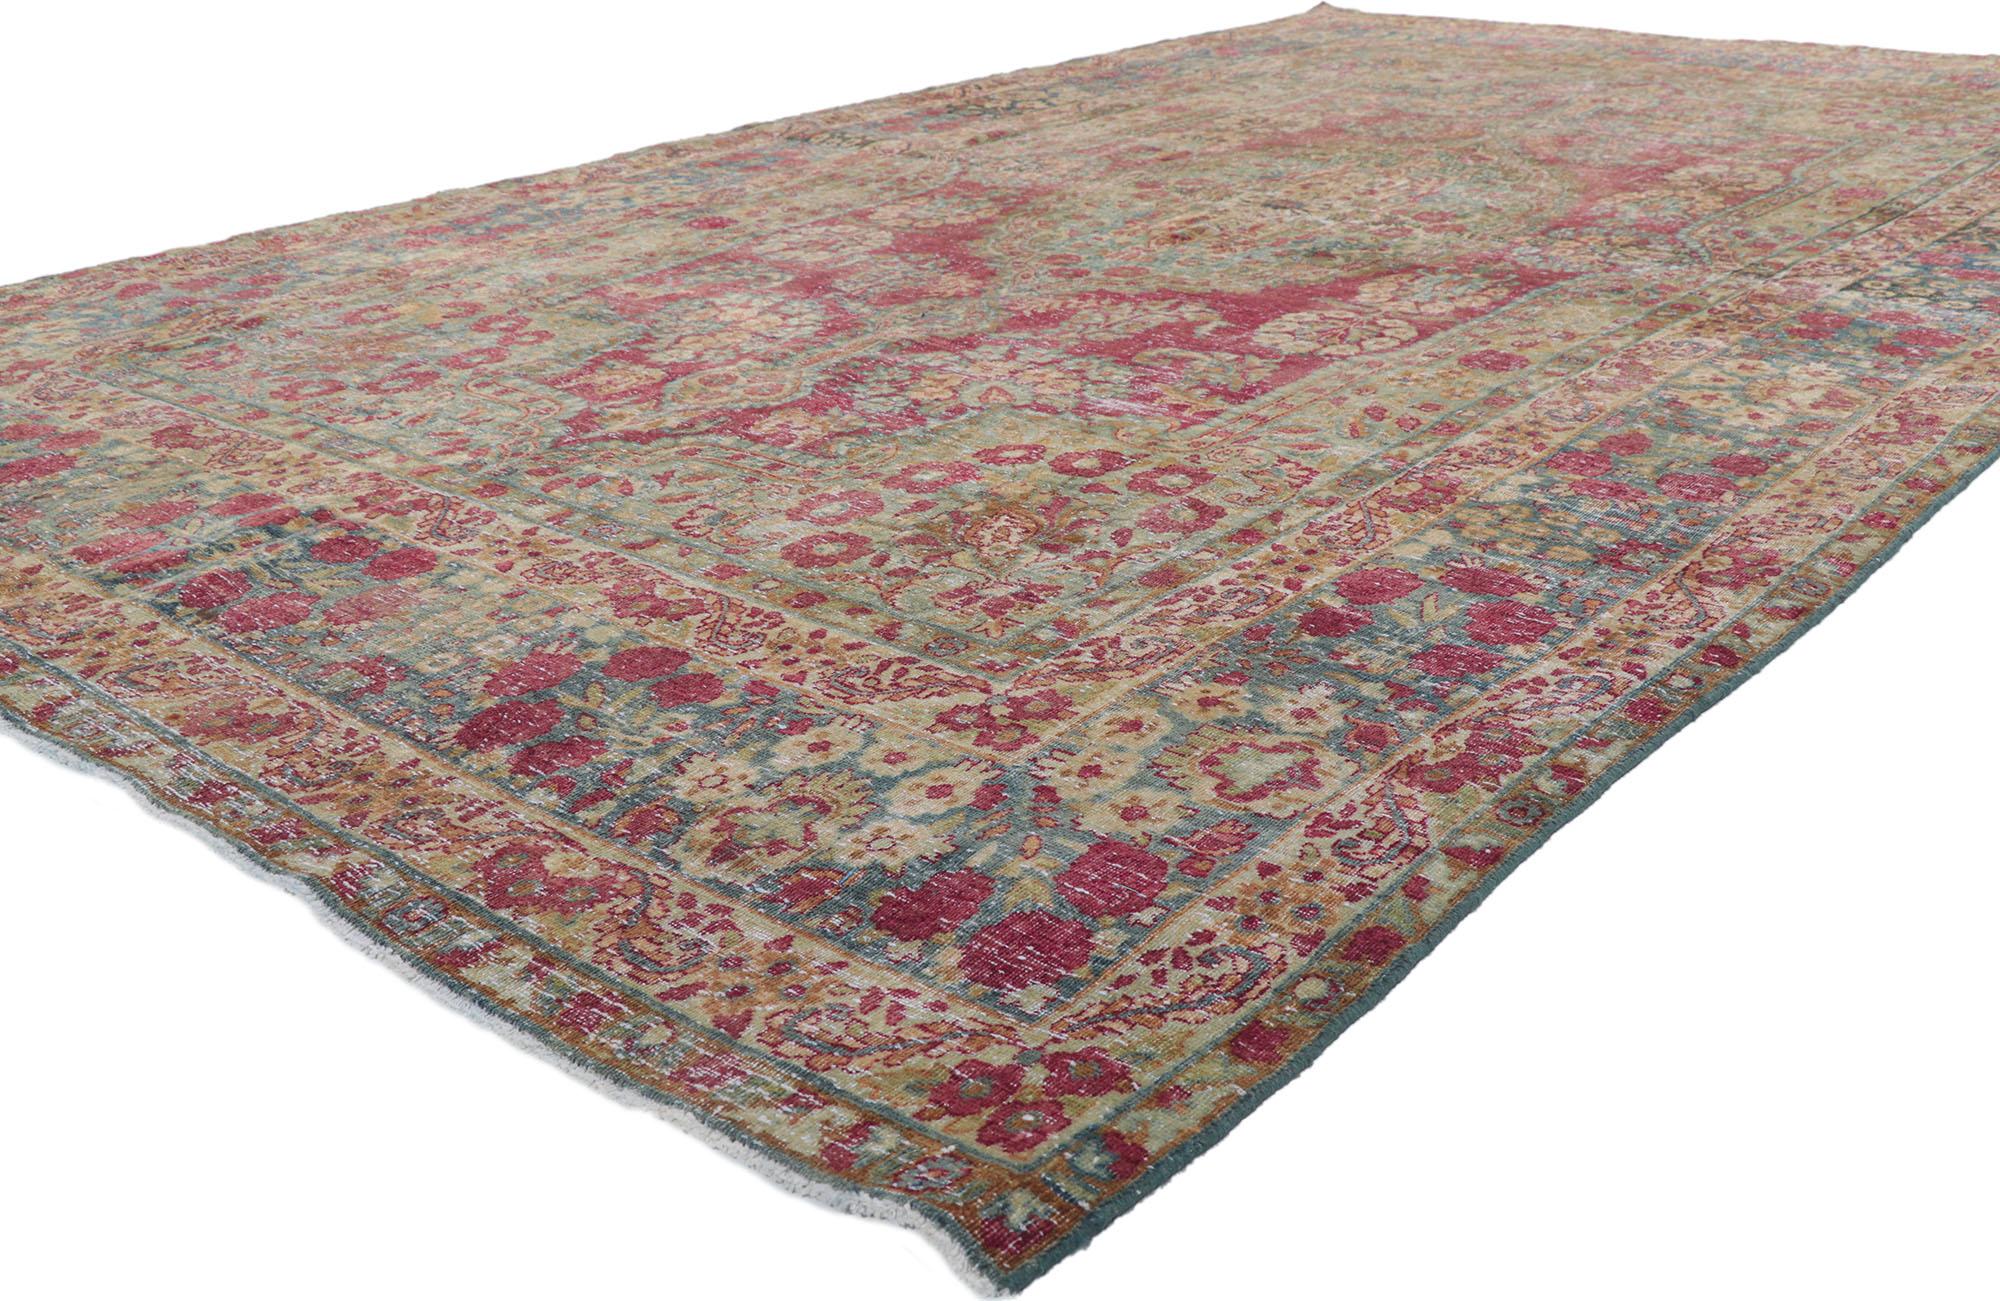 61013 Antique Persian Kerman Rug, 06'05 x 10'11. 
Distressed. Desirable Age Wear. Antique Wash. Abrash. Hand-knotted wool. Made in Iran. 